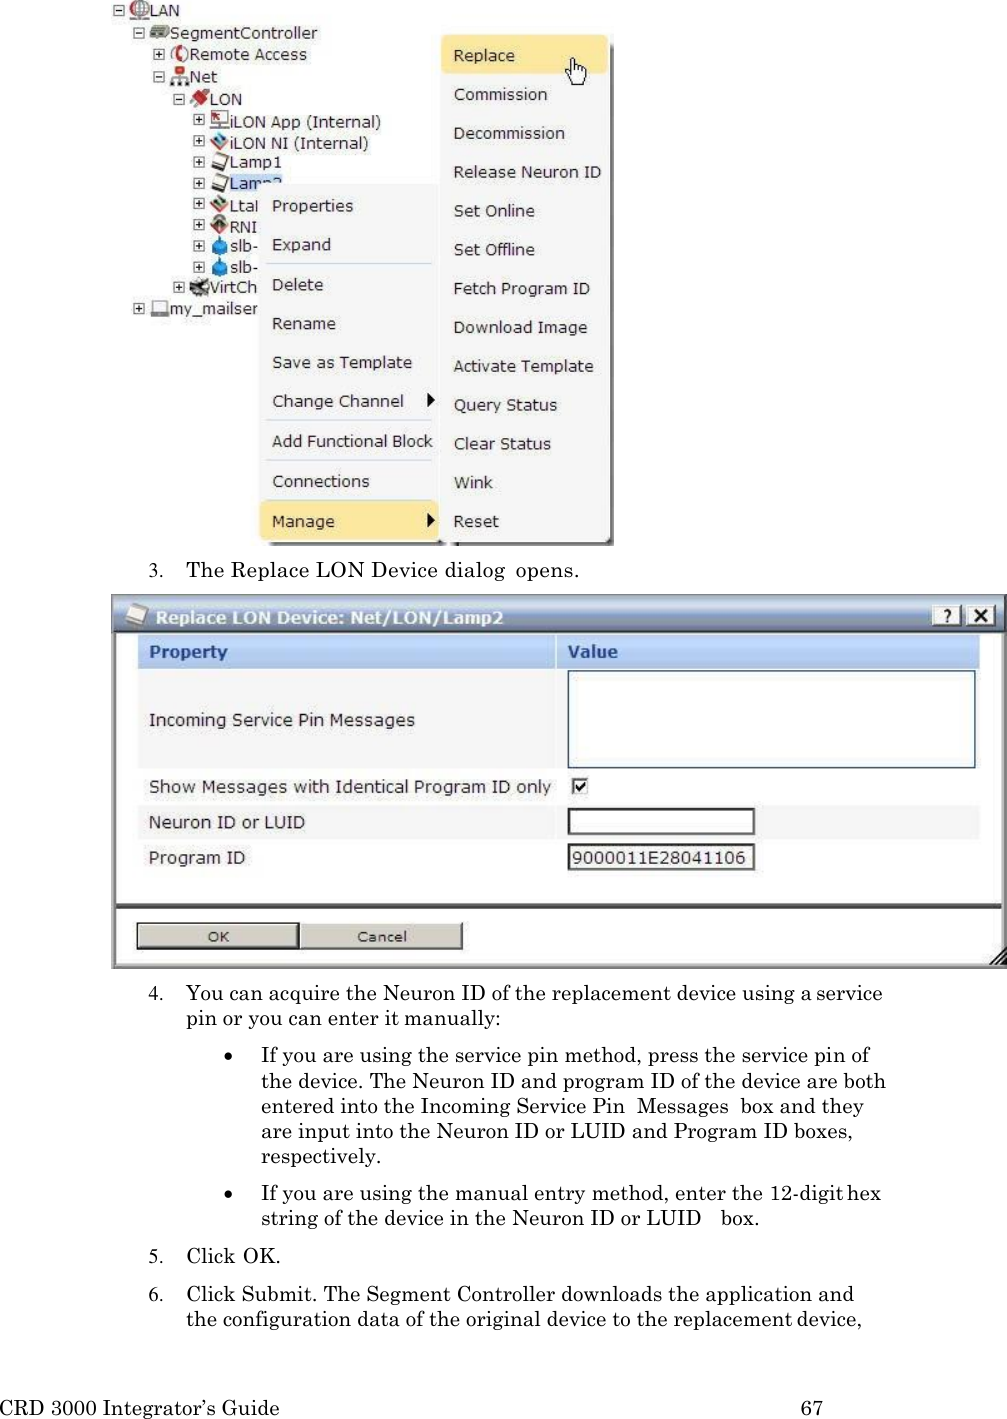 CRD 3000 Integrator’s Guide 67   3. The Replace LON Device dialog  opens. 4. You can acquire the Neuron ID of the replacement device using a service pin or you can enter it manually:  If you are using the service pin method, press the service pin of the device. The Neuron ID and program ID of the device are both entered into the Incoming Service Pin  Messages  box and they are input into the Neuron ID or LUID and Program ID boxes, respectively.  If you are using the manual entry method, enter the 12-digit hex string of the device in the Neuron ID or LUID   box. 5. Click OK. 6. Click Submit. The Segment Controller downloads the application and the configuration data of the original device to the replacement device, 